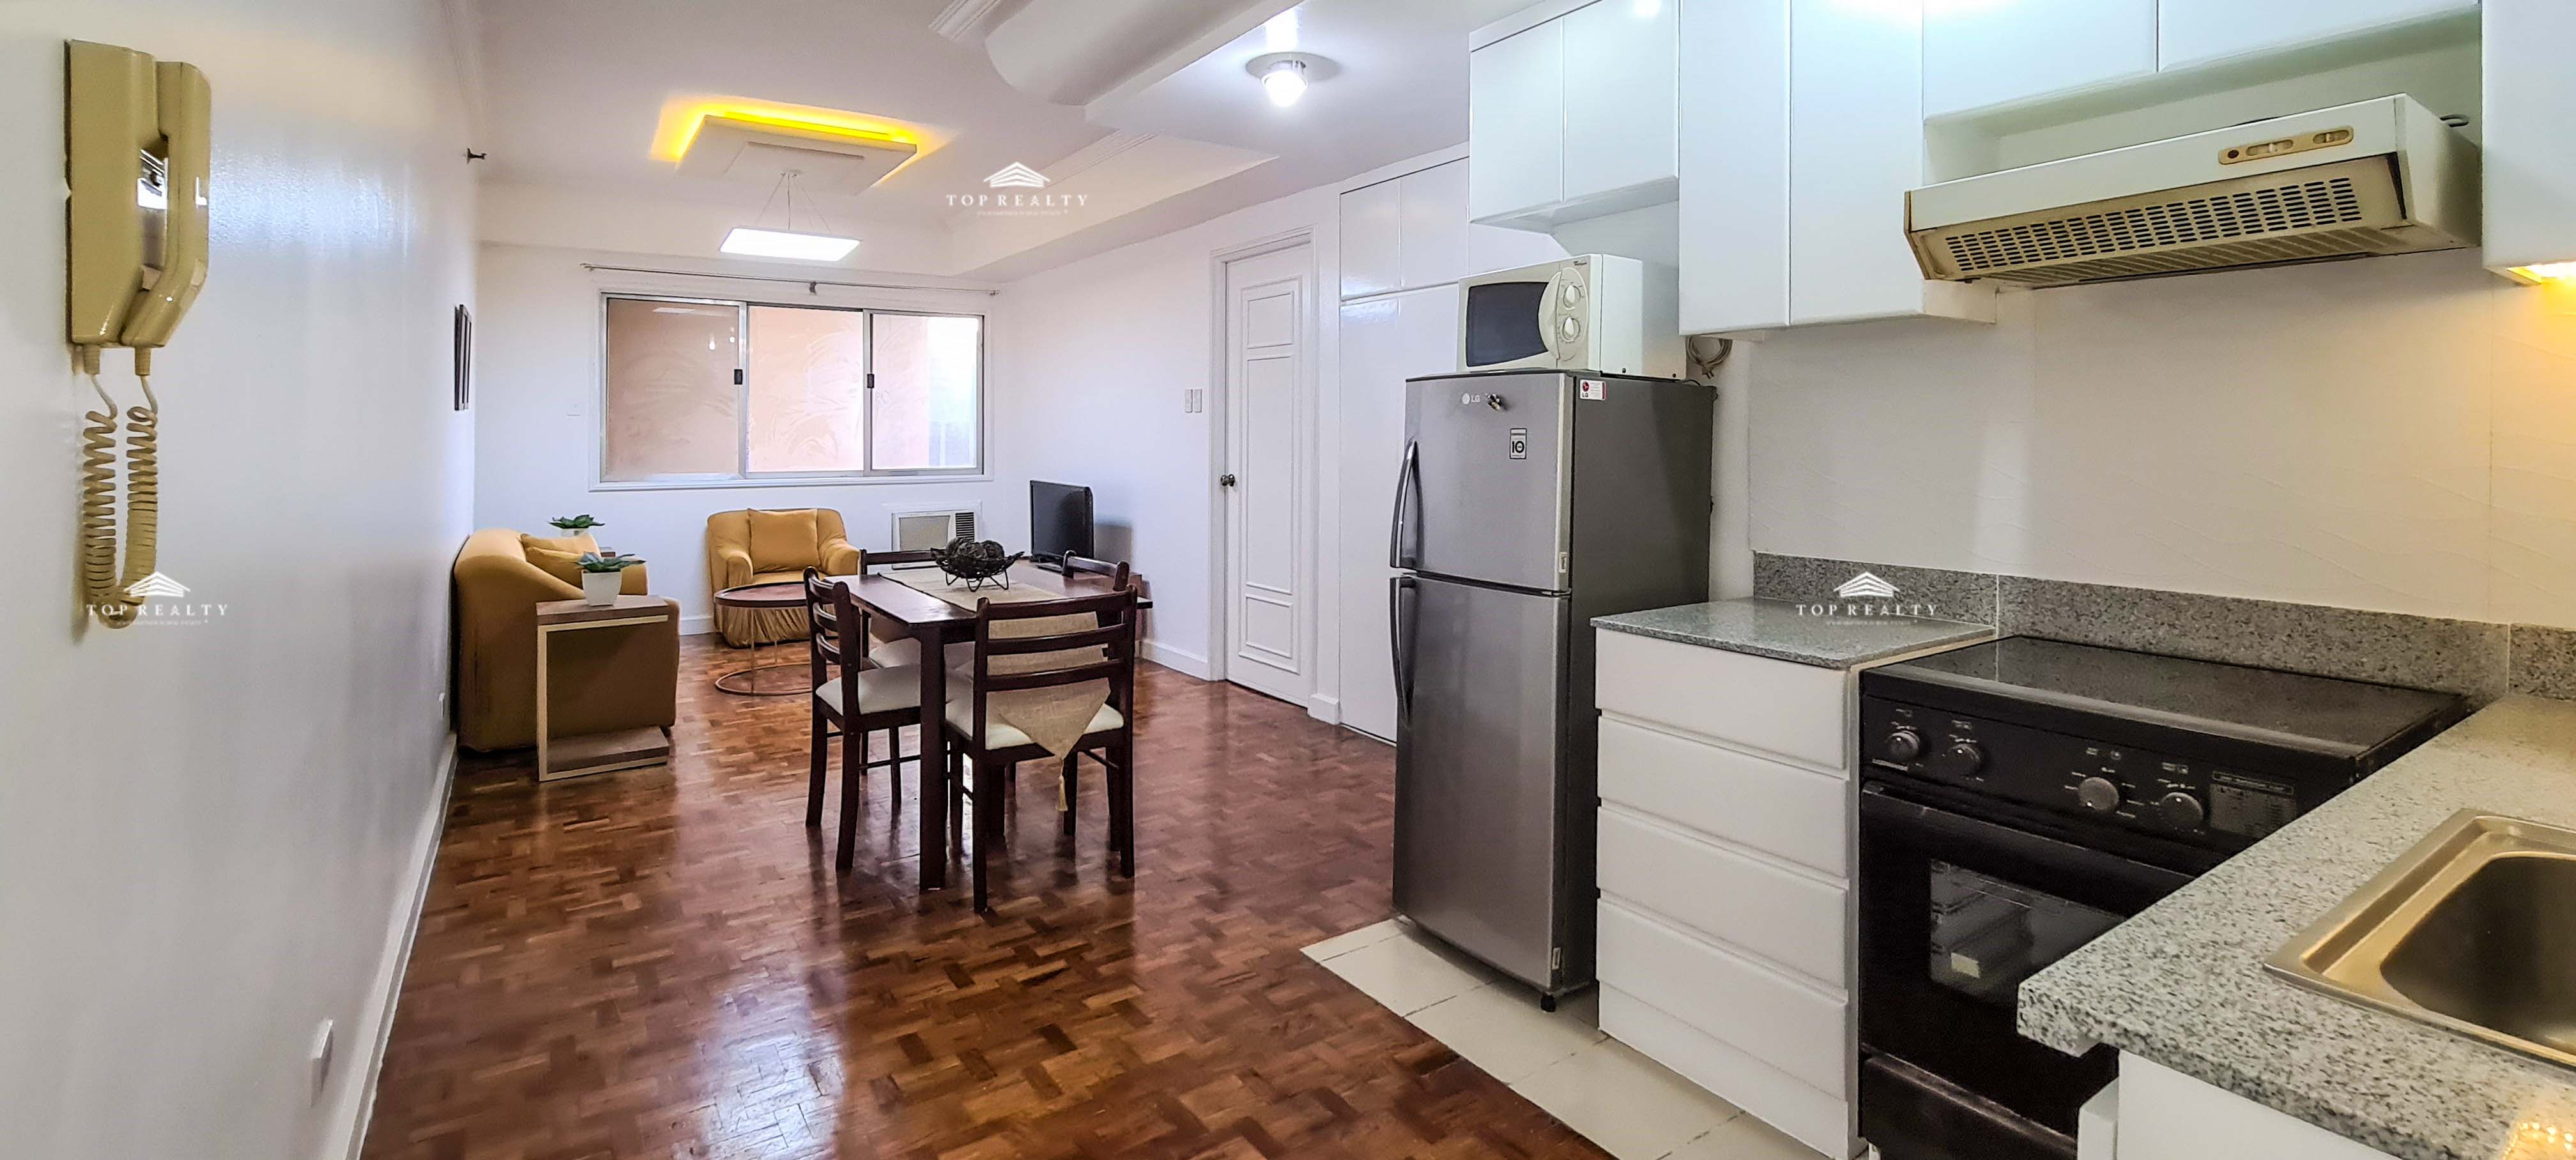 For Rent: Fully-Furnished 1BR Condominium in Nobel Plaza, Makati City